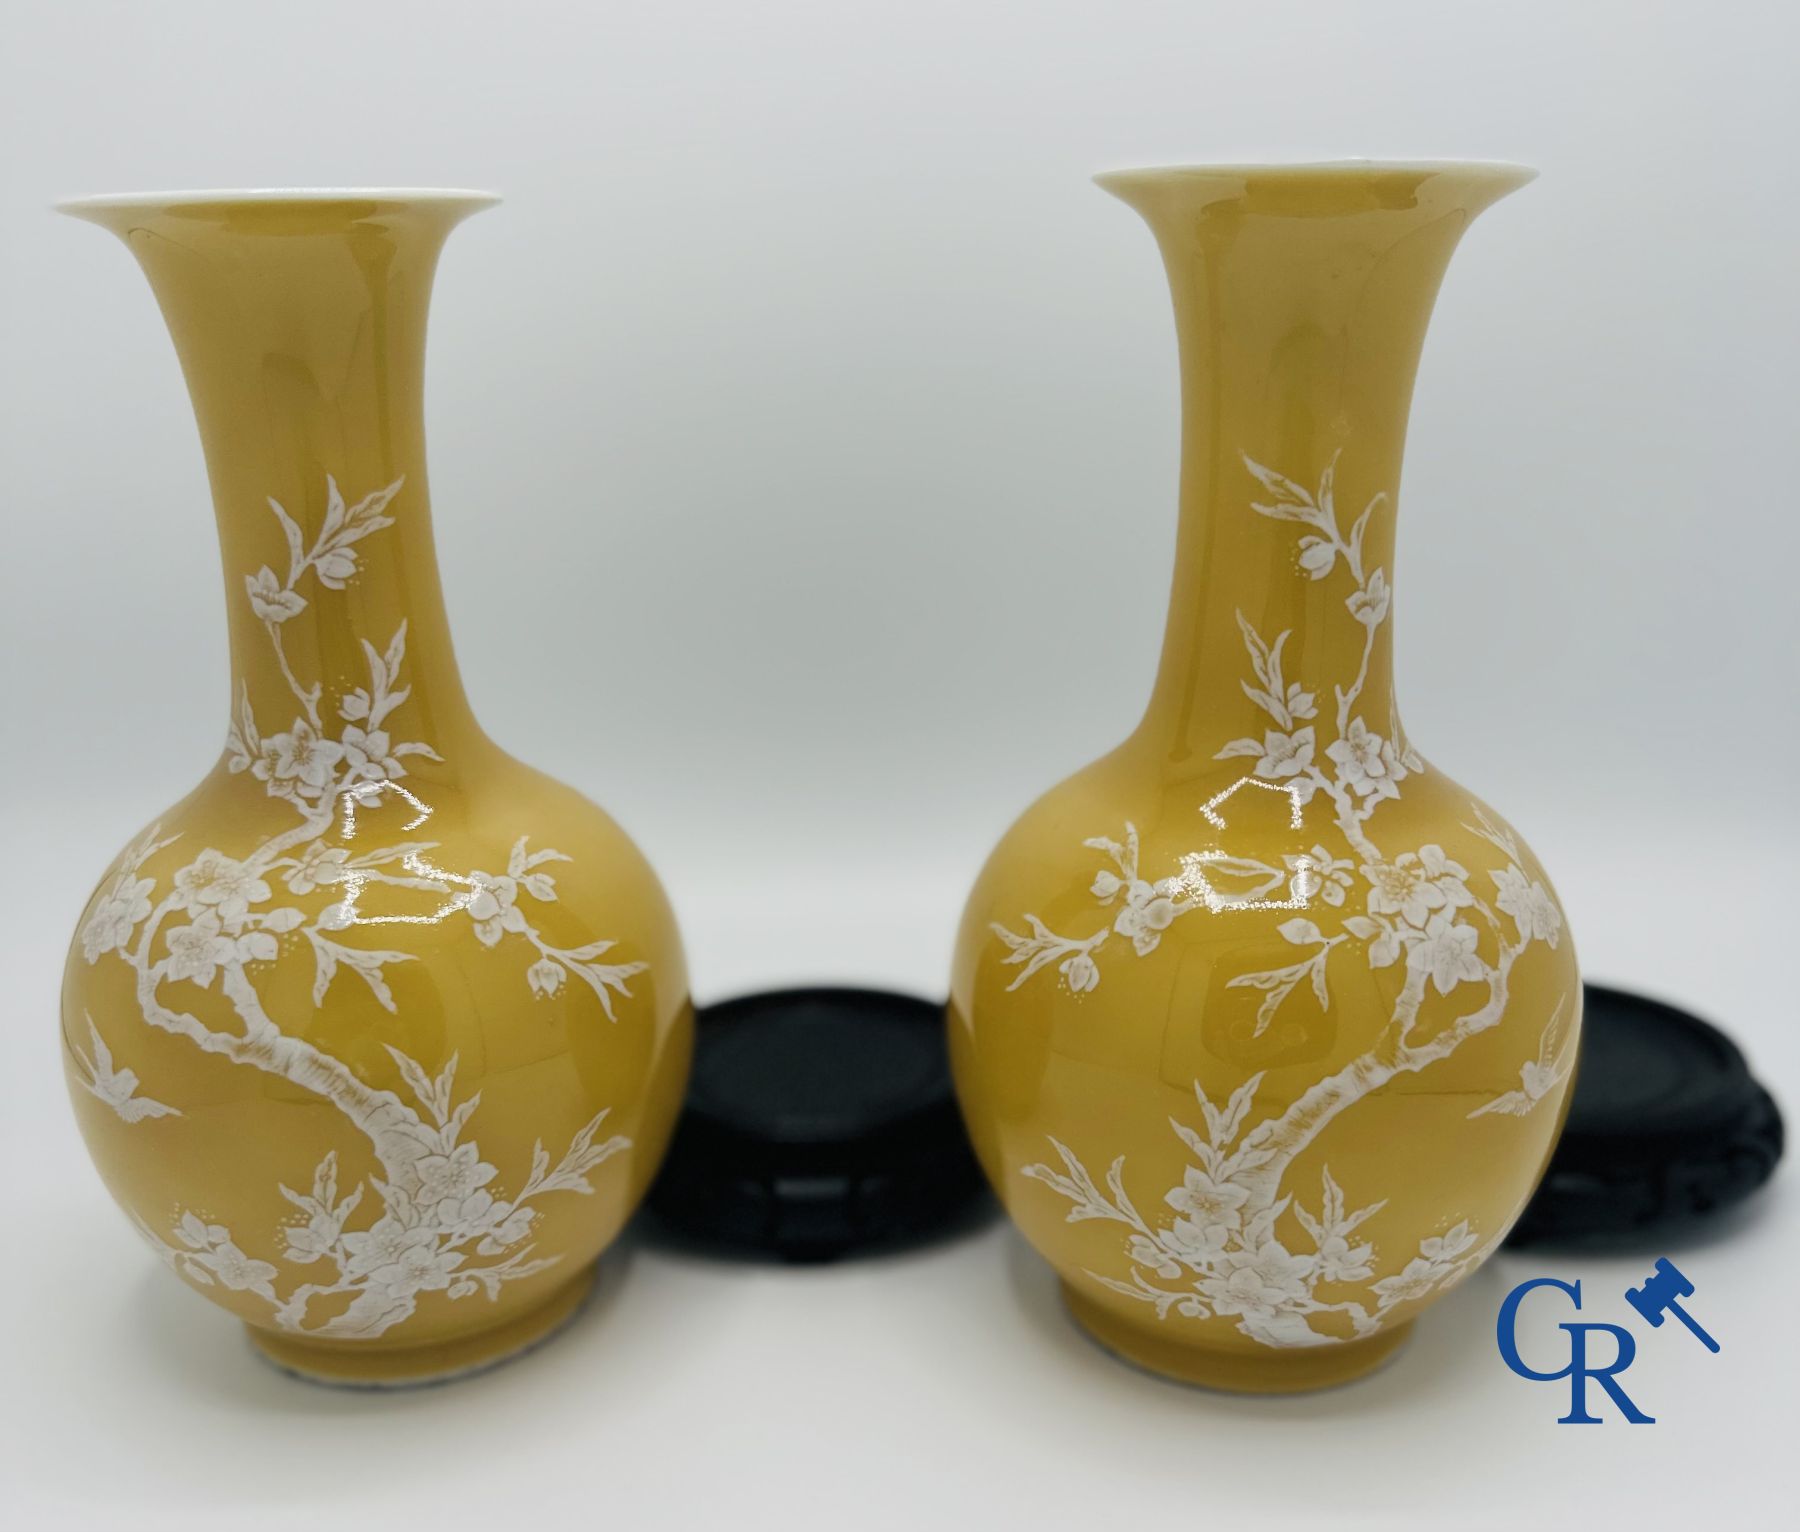 Chinese porcelain: Pair of Chinese vases with a floral decor on a yellow glazed surface. 20th centur - Image 5 of 6